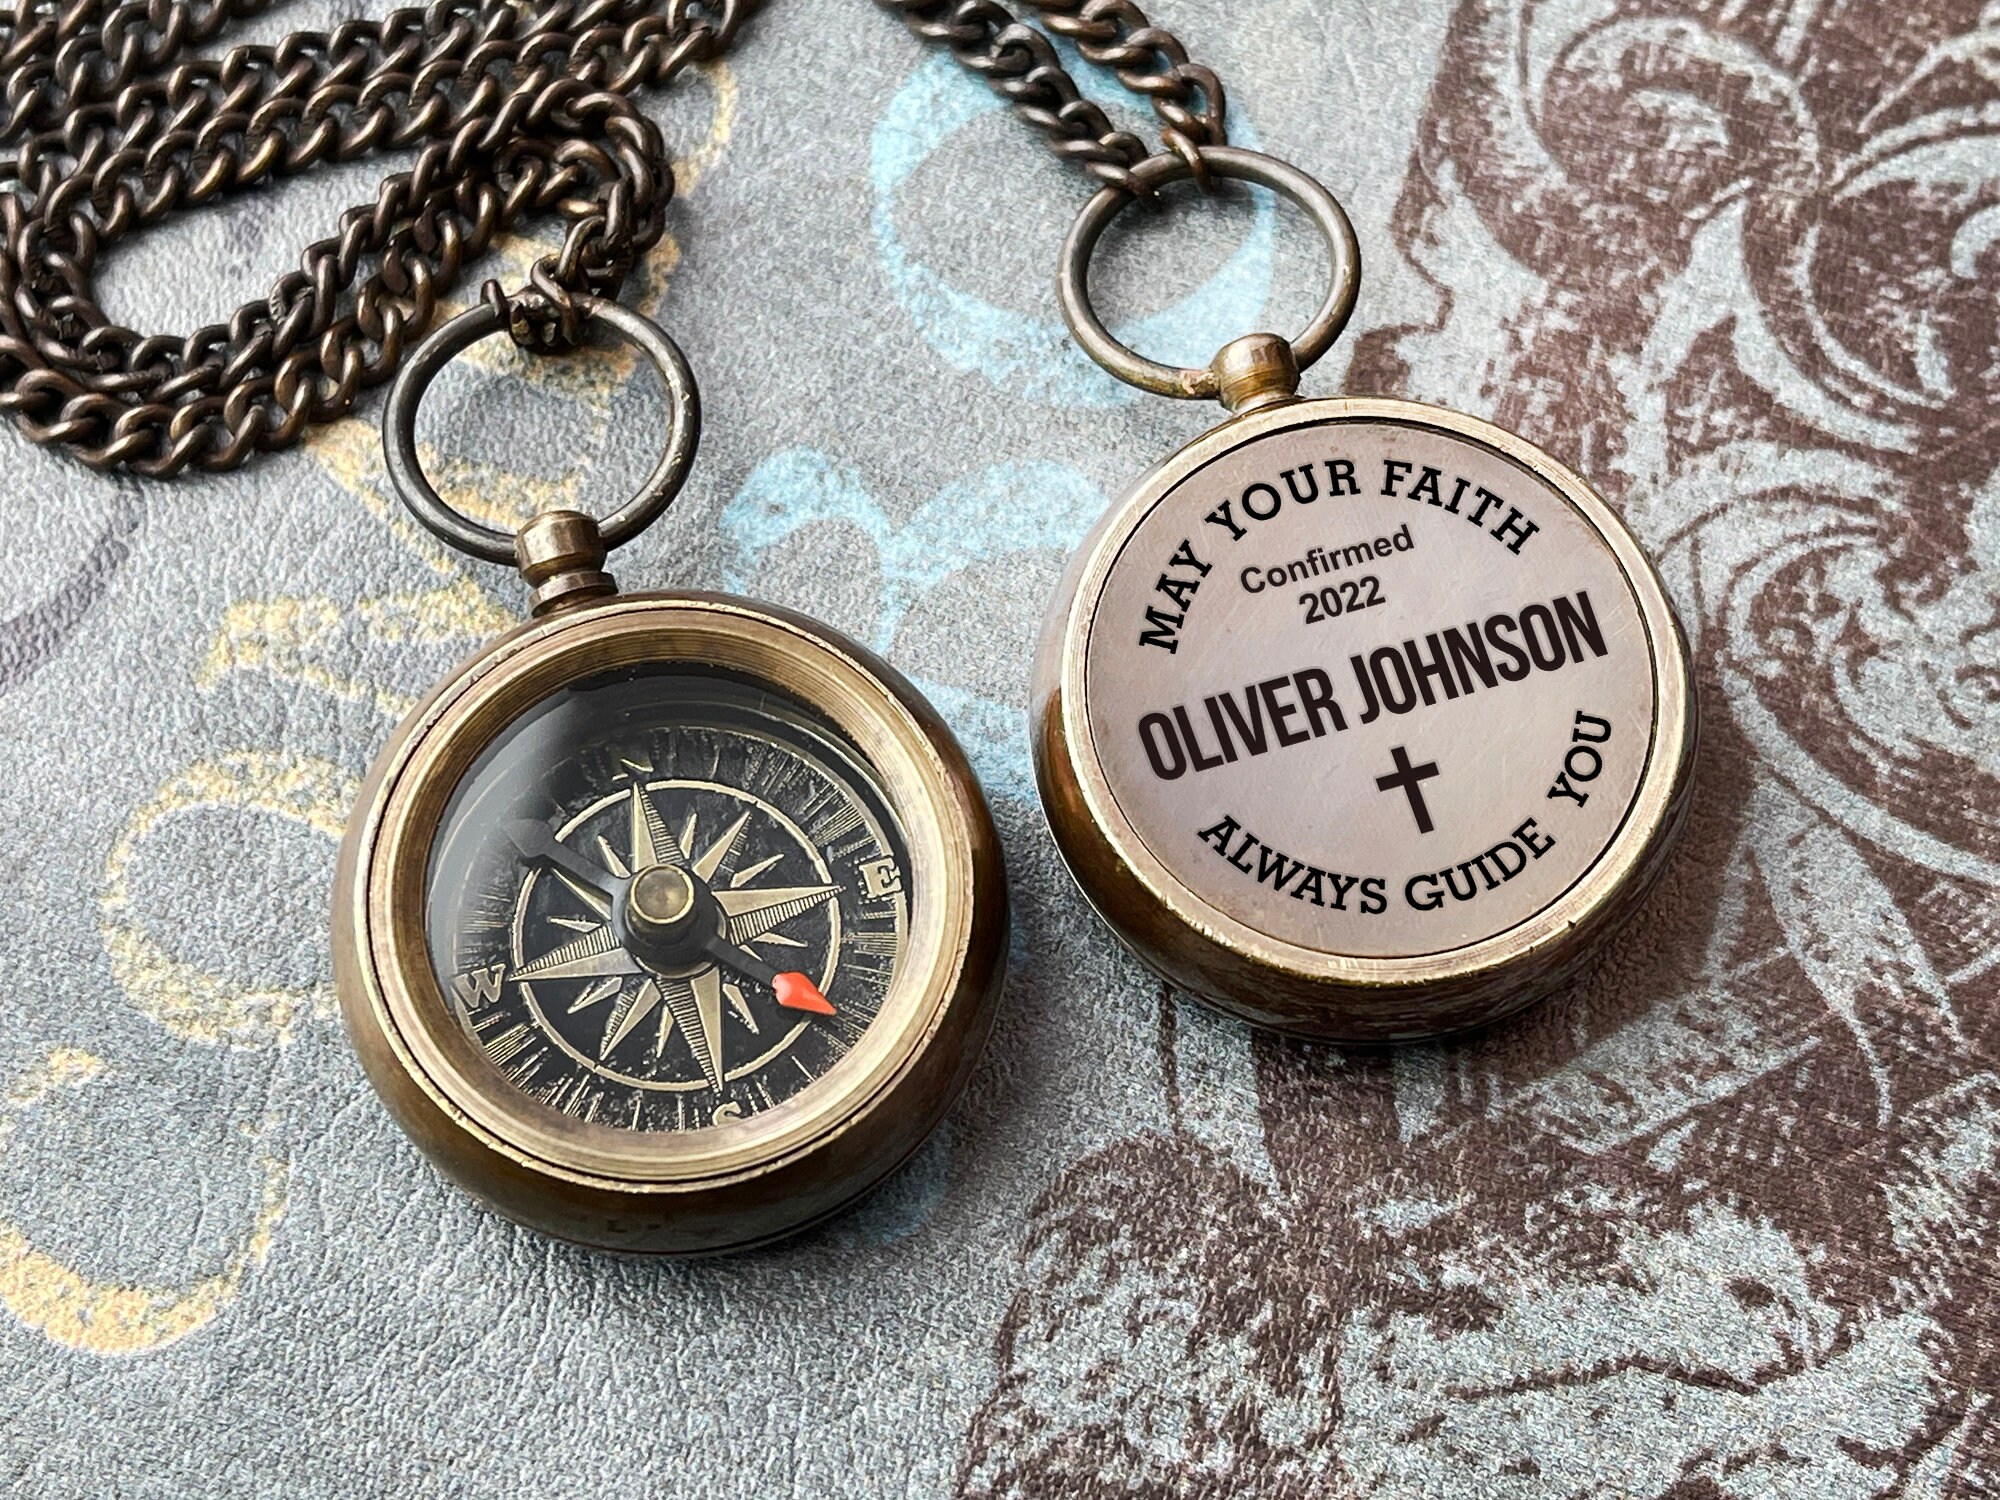 Comes with free wooden case Engraved Compass graduation Gift,nautical Personalized Baptism Gift Gift for Baptism Godson Gift For Baby Dedication Gift Christening Baptism Gift Personalized Compass 